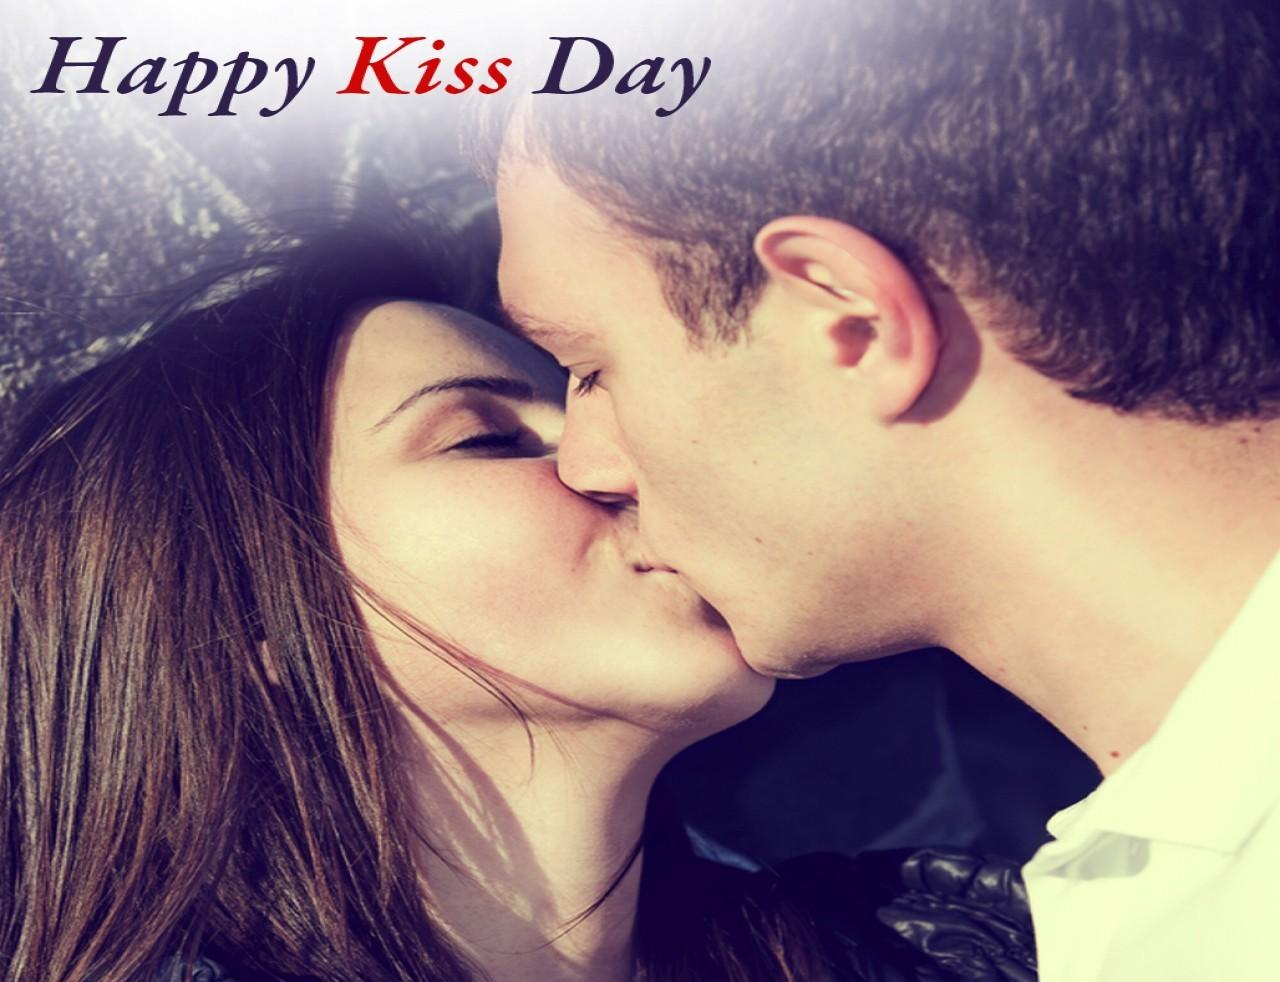 Free download Happy Kiss Day Wallpaper Image SMS Kiss Day Wishes